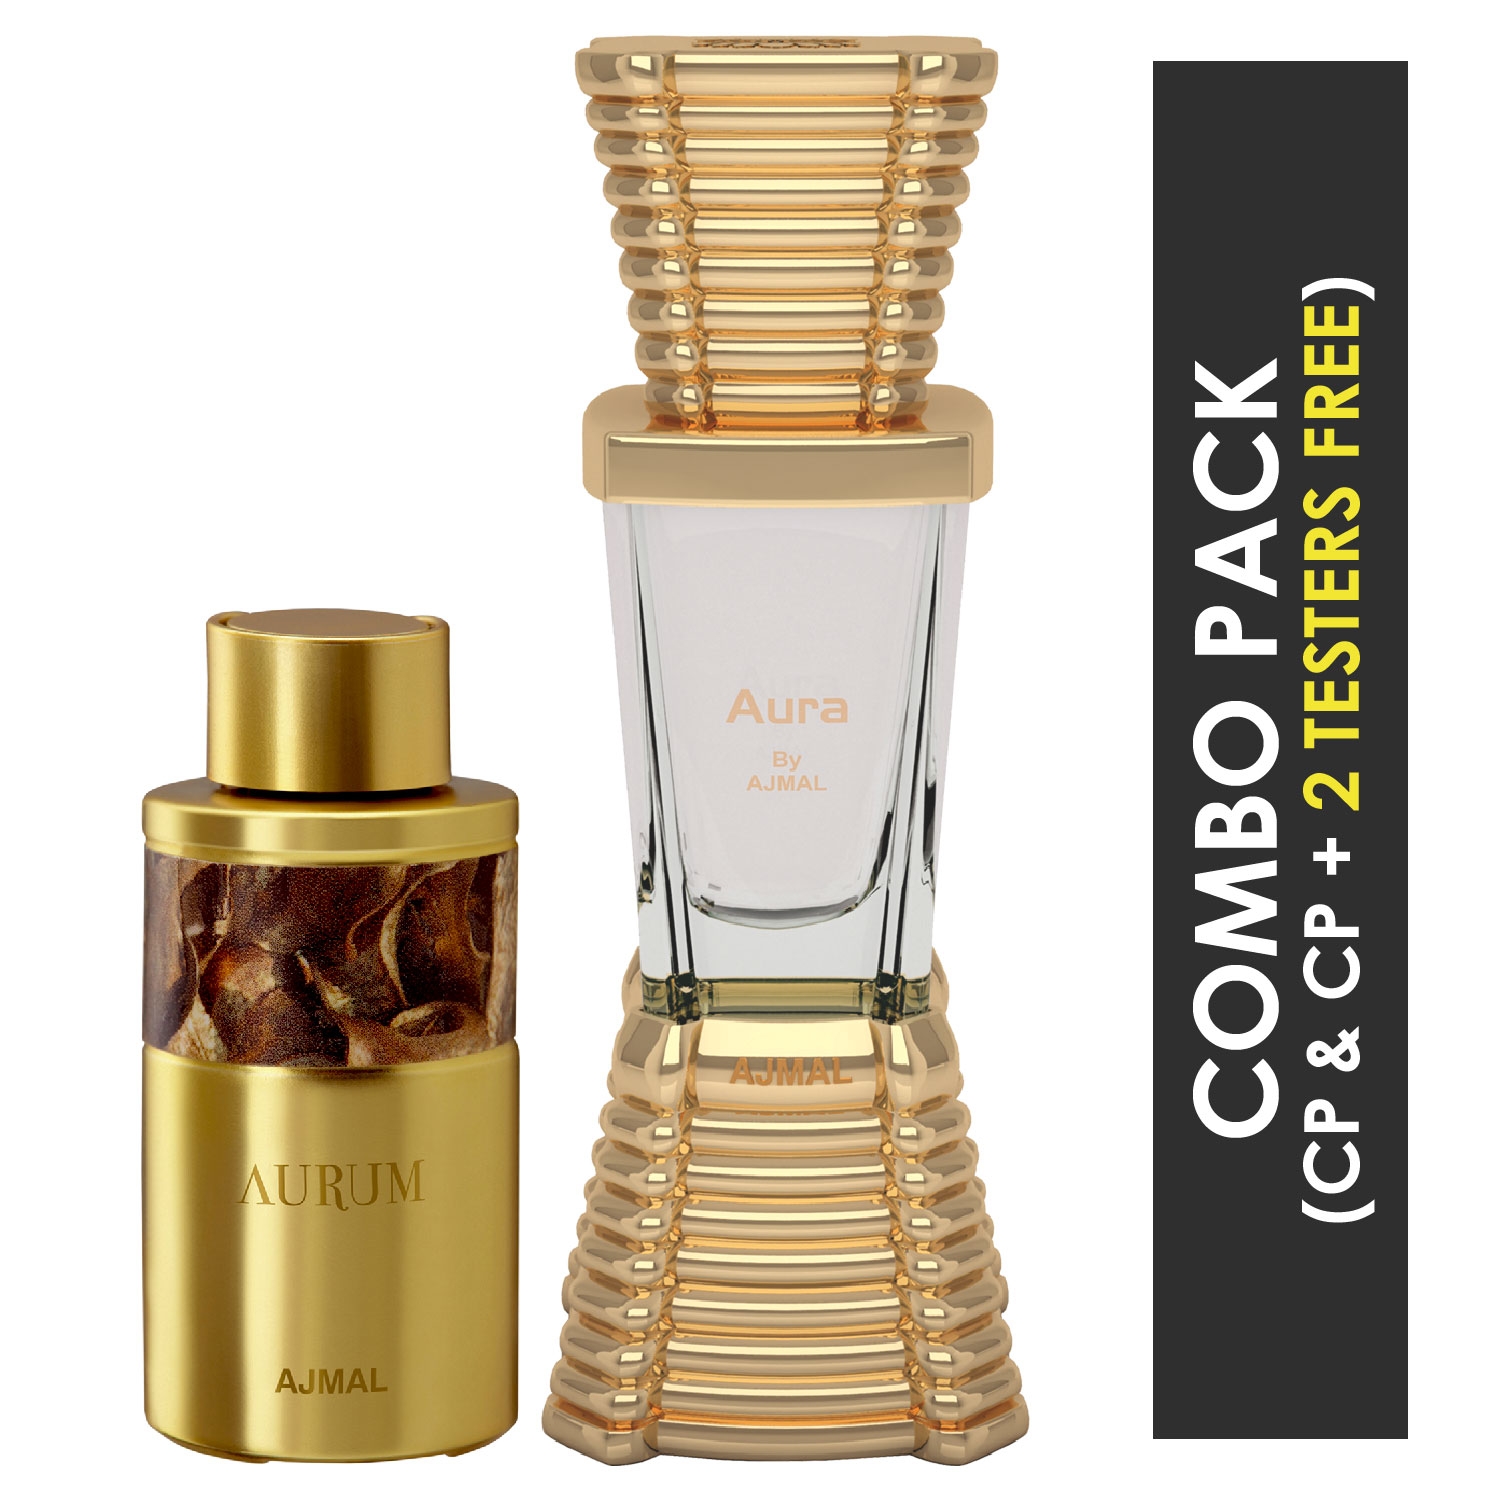 Ajmal | Ajmal Aurum Concentrated Perfume Oil Fruity Floral Alcohol-free Attar 10ml for Women and Aura Concentrated Perfume Oil Floral Fruity Alcohol-free Attar 10ml for Unisex 2 Parfum Testers FREE